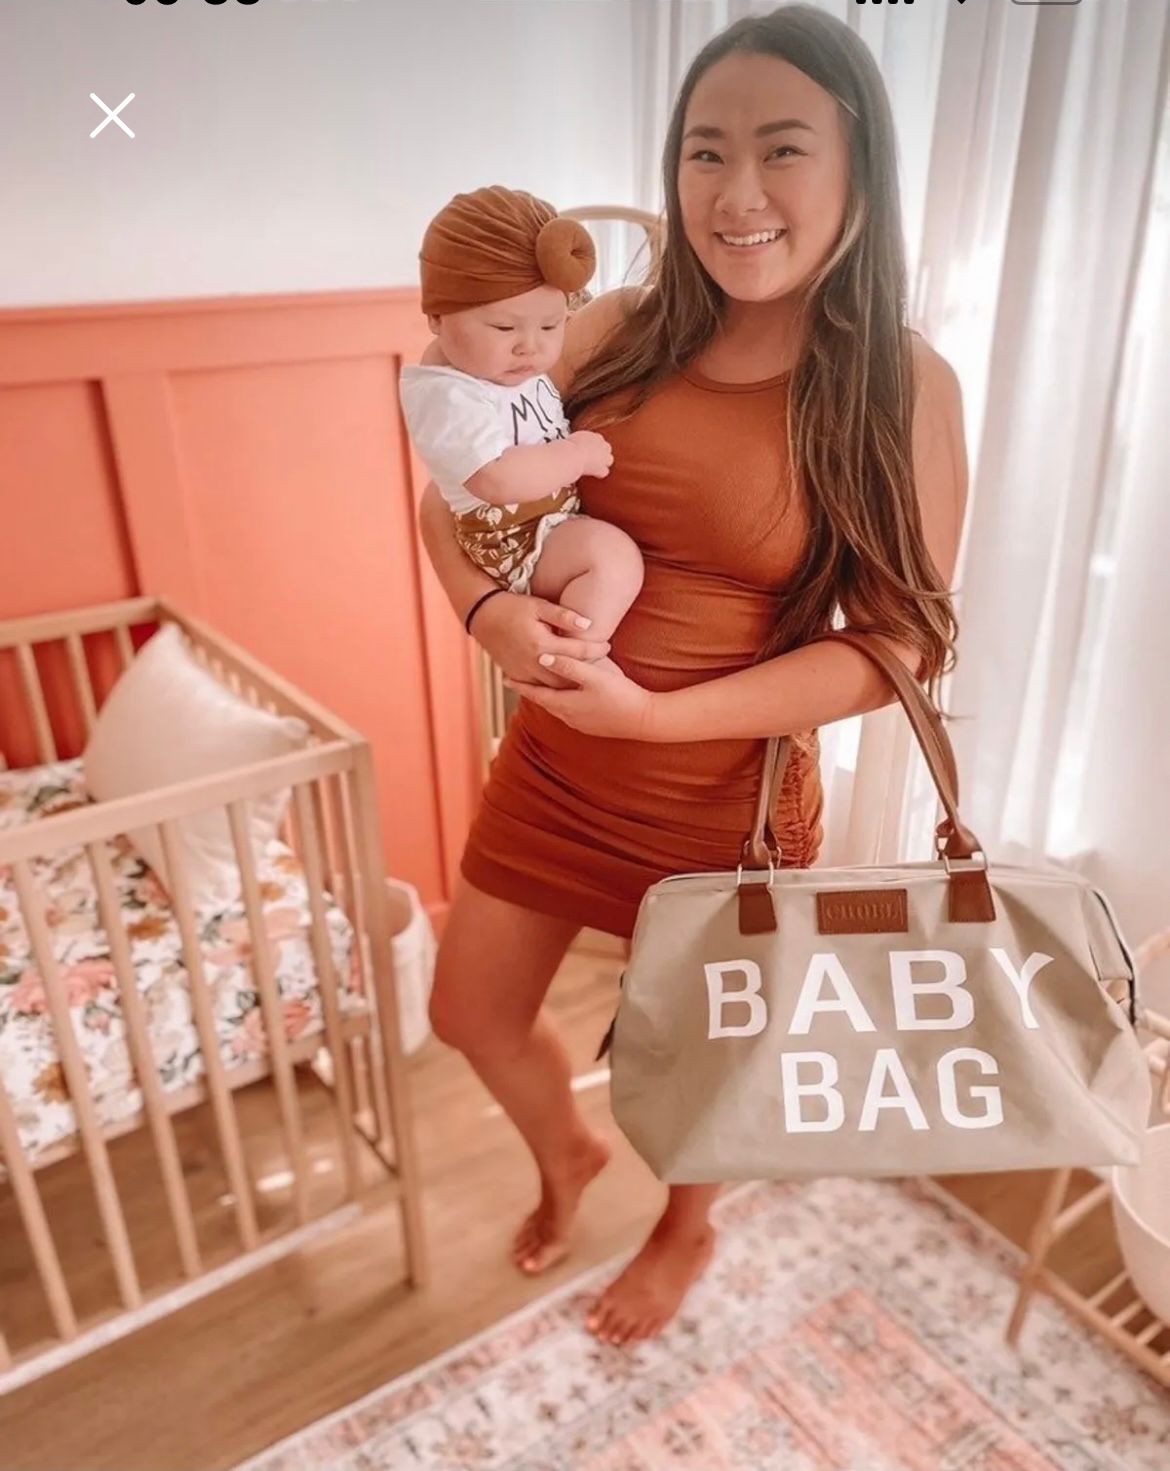 Beige Baby Diaper Bag Baby Bags for Hospital & Functional Large Baby Diaper Travel Bag for Baby Care - CHQEL